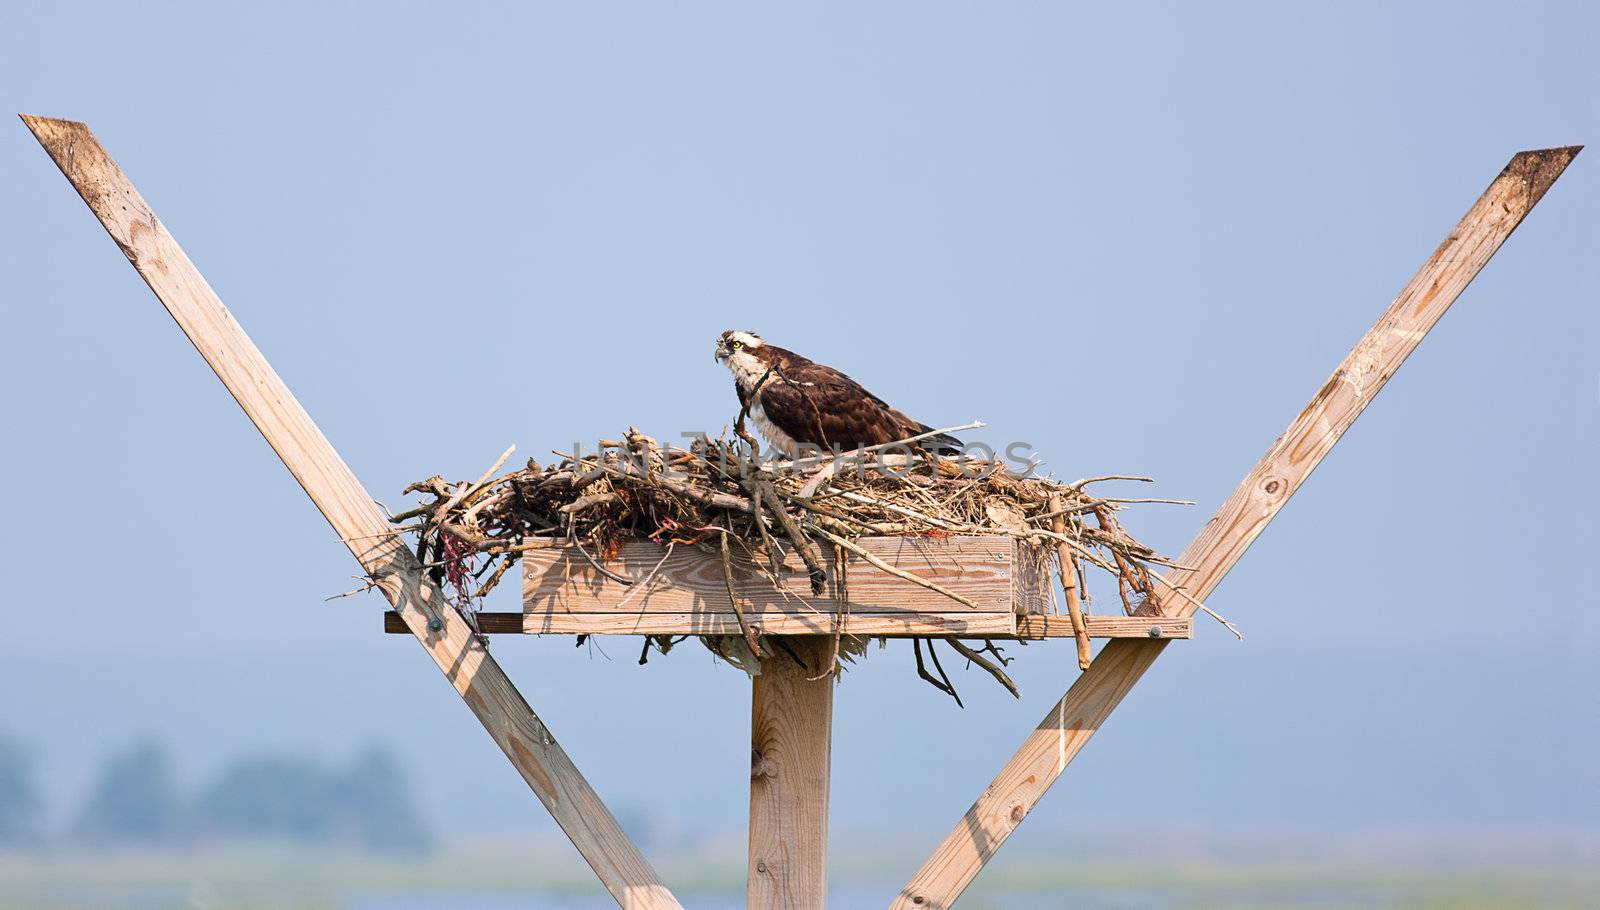 An osprey in a nest on a wooden perch